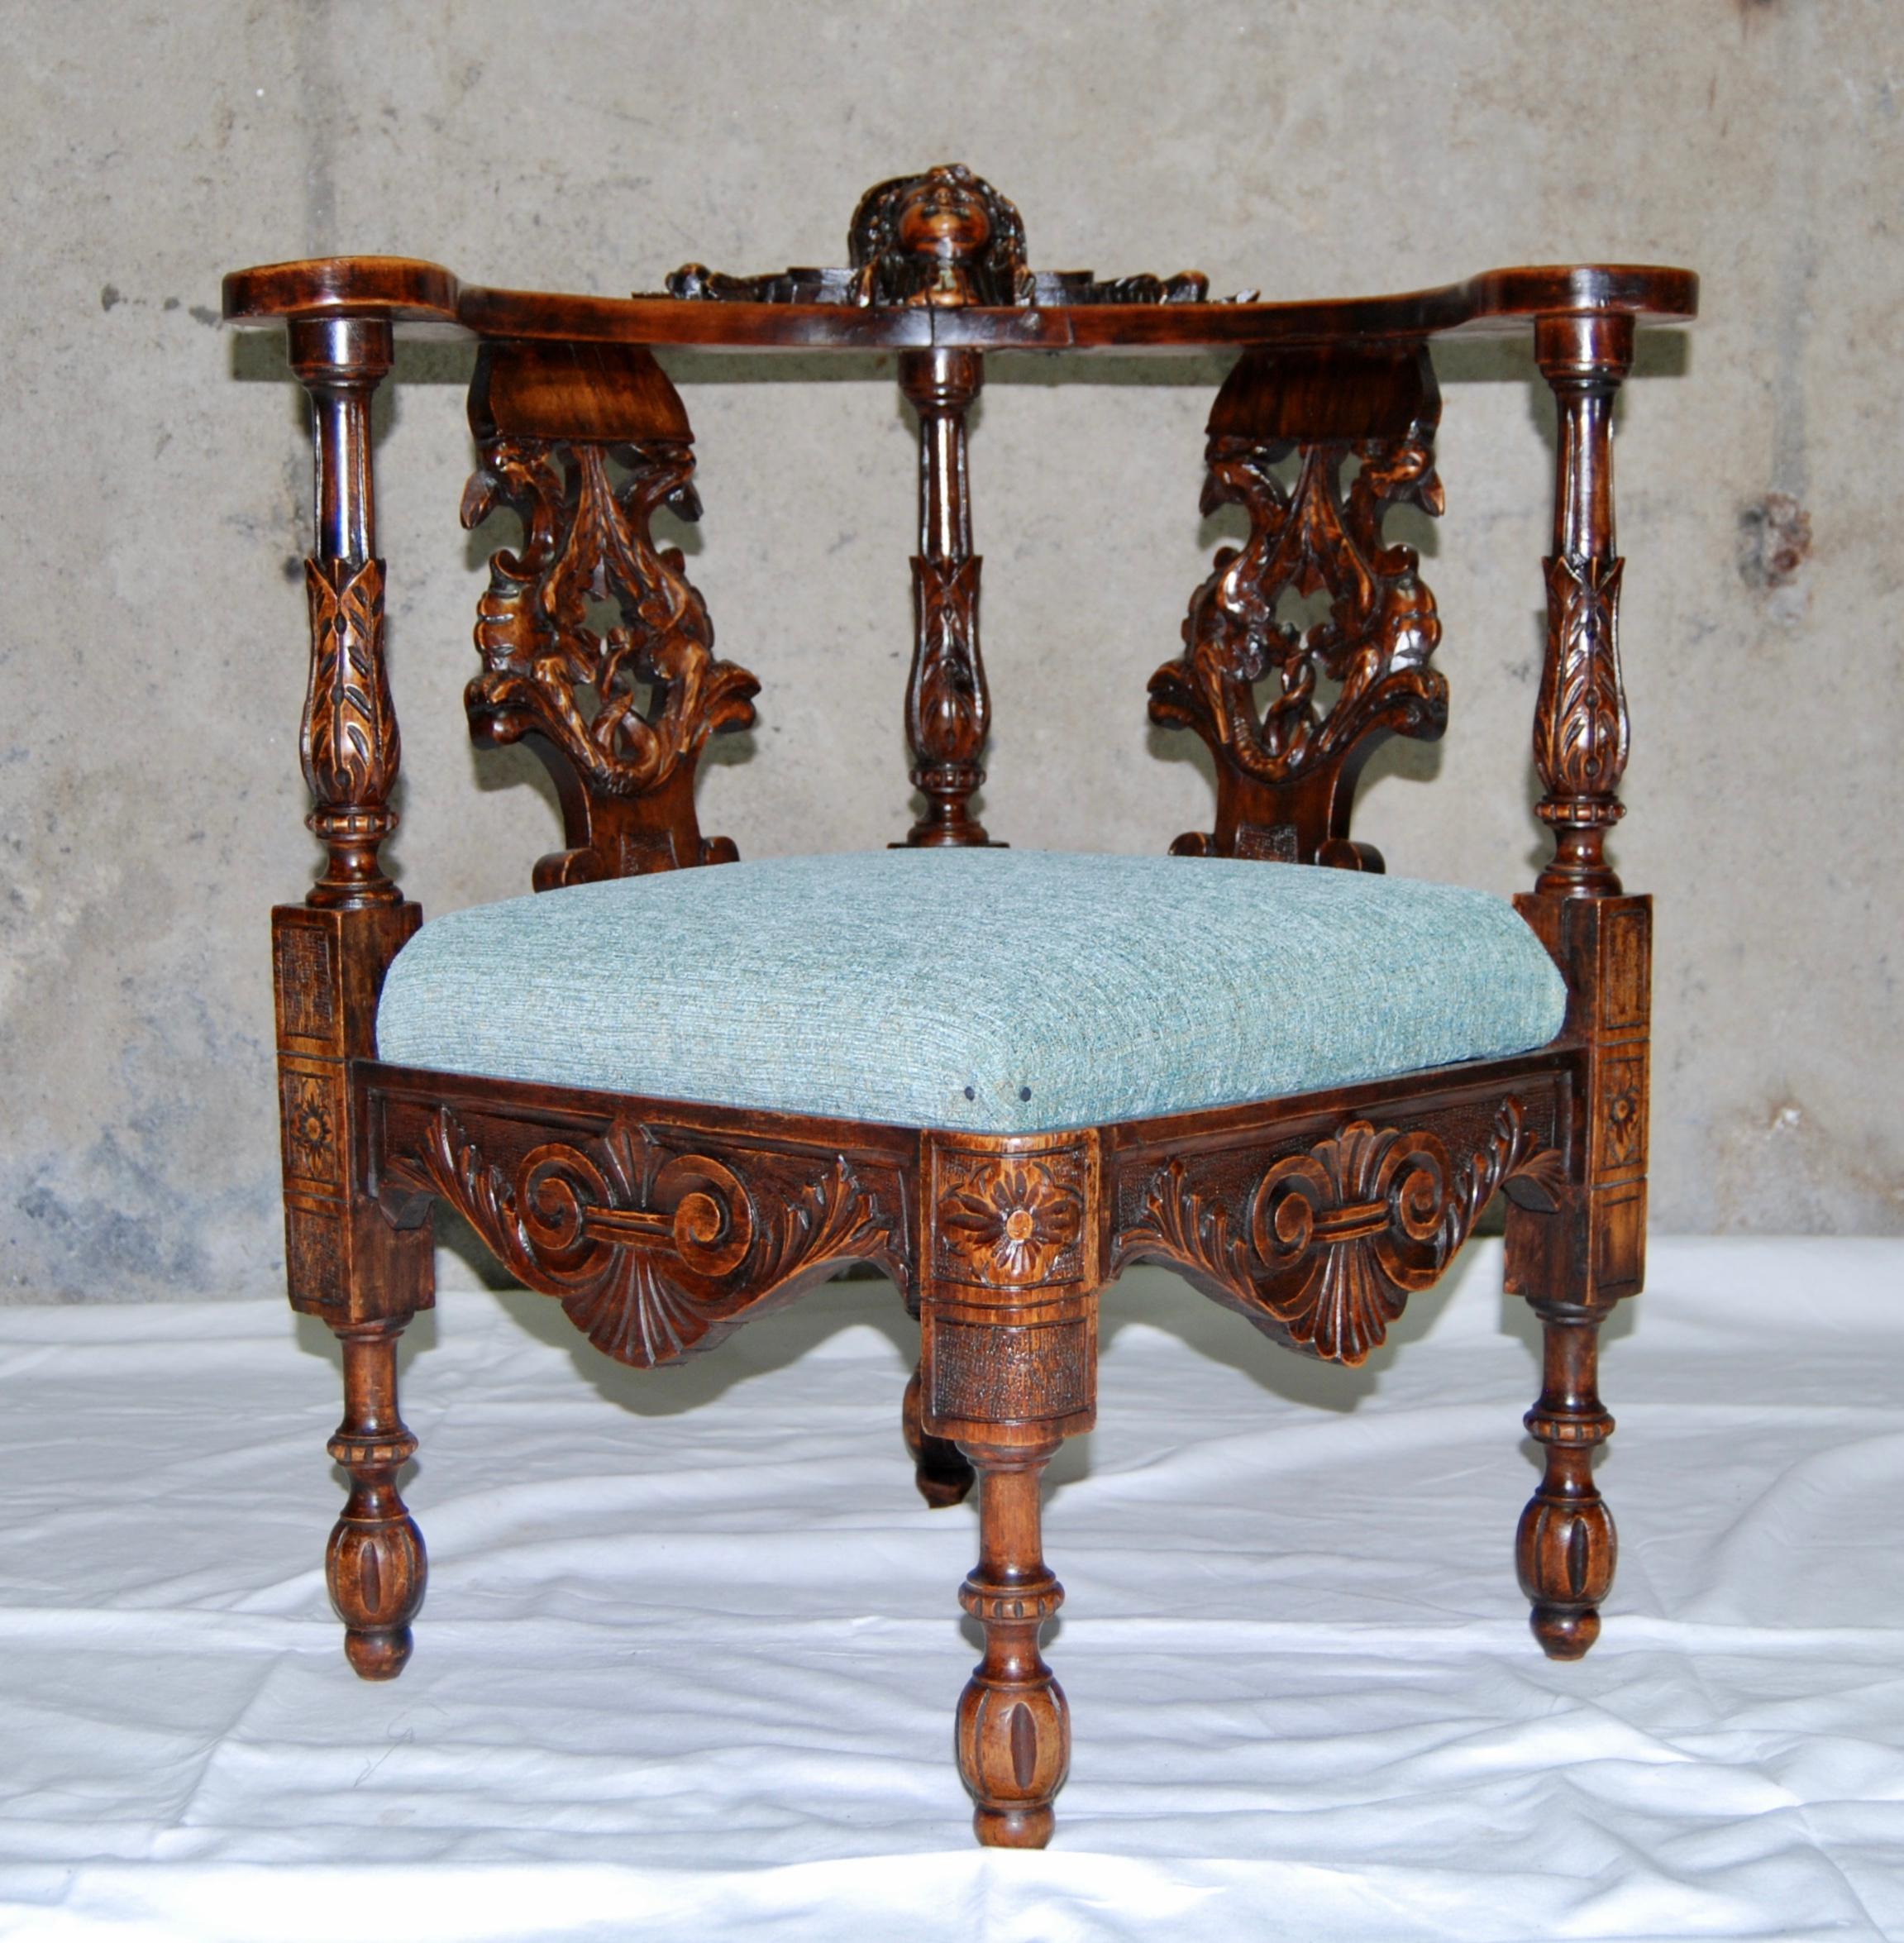 A rare & beautiful neo-renaissance armchair in hand-carved walnut.
Dating back to the 1850s, this magnificent armchair is richly decorated with flowers, leaves, shells, griffins and chimeras which are enhanced by the rich patina that has developed